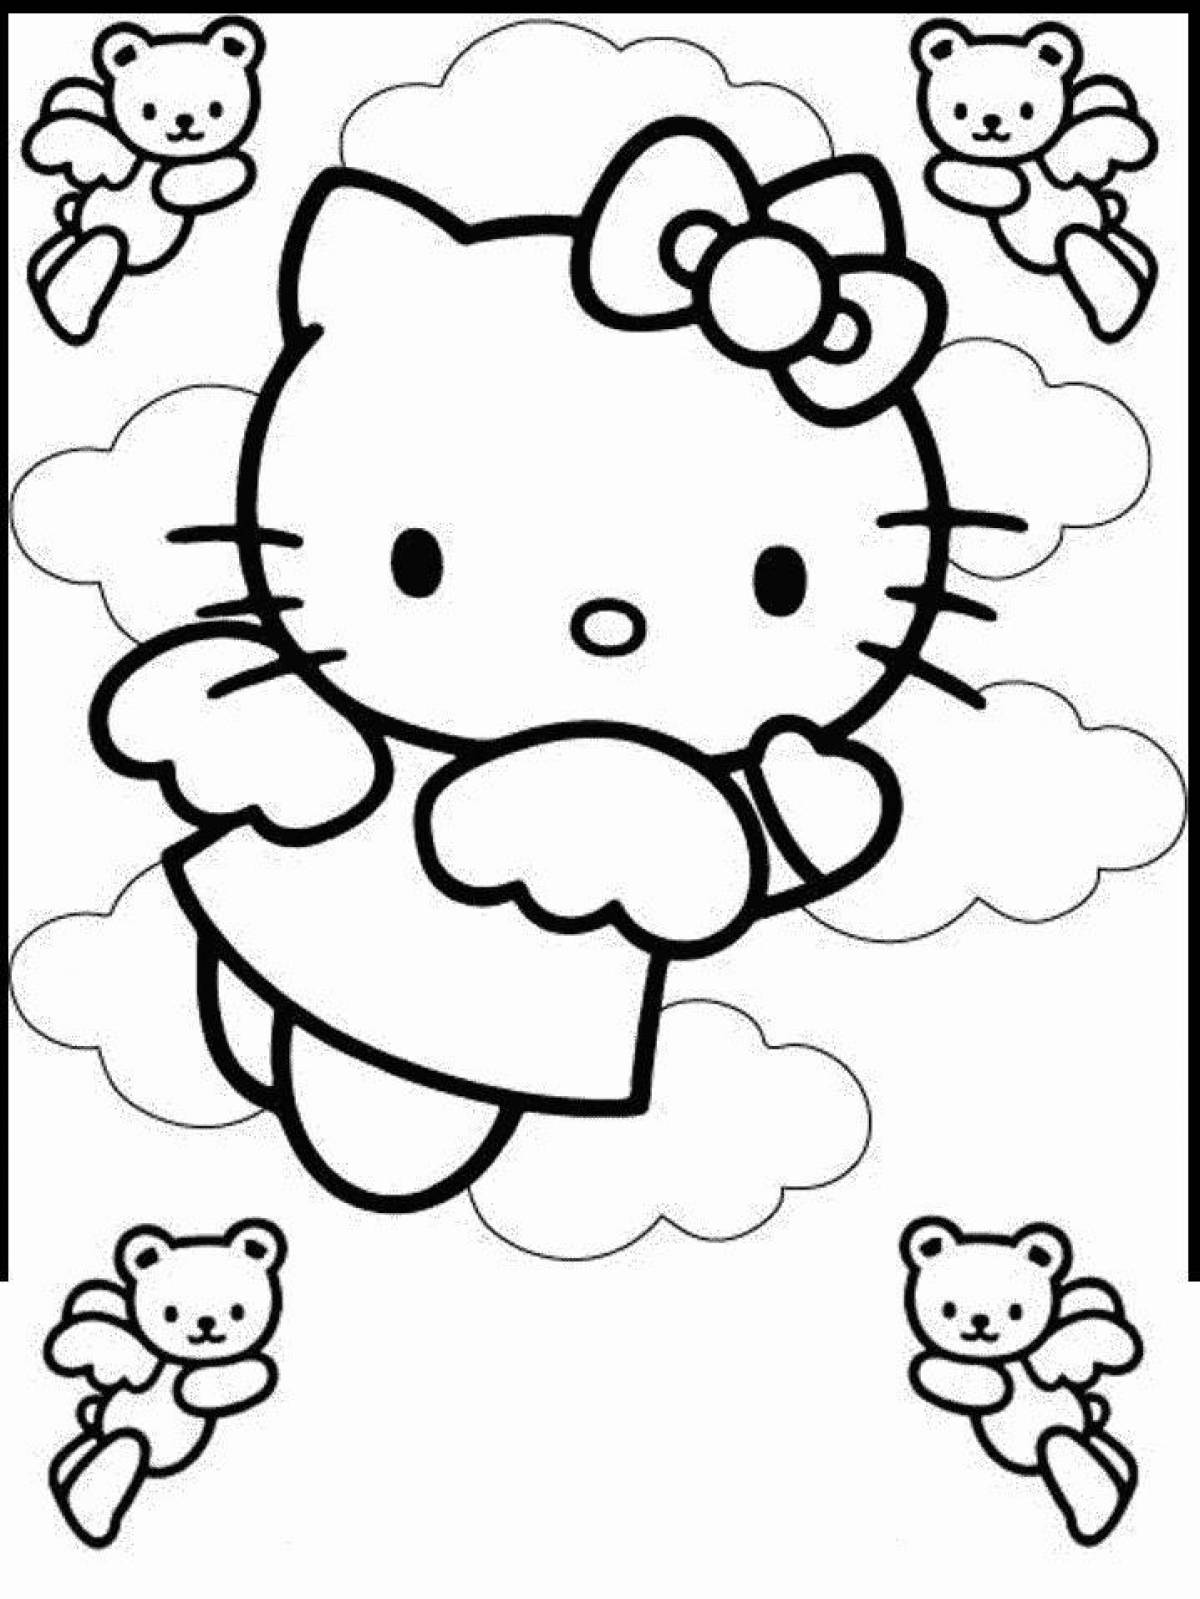 Colored crazy chicks and hello kitty coloring page